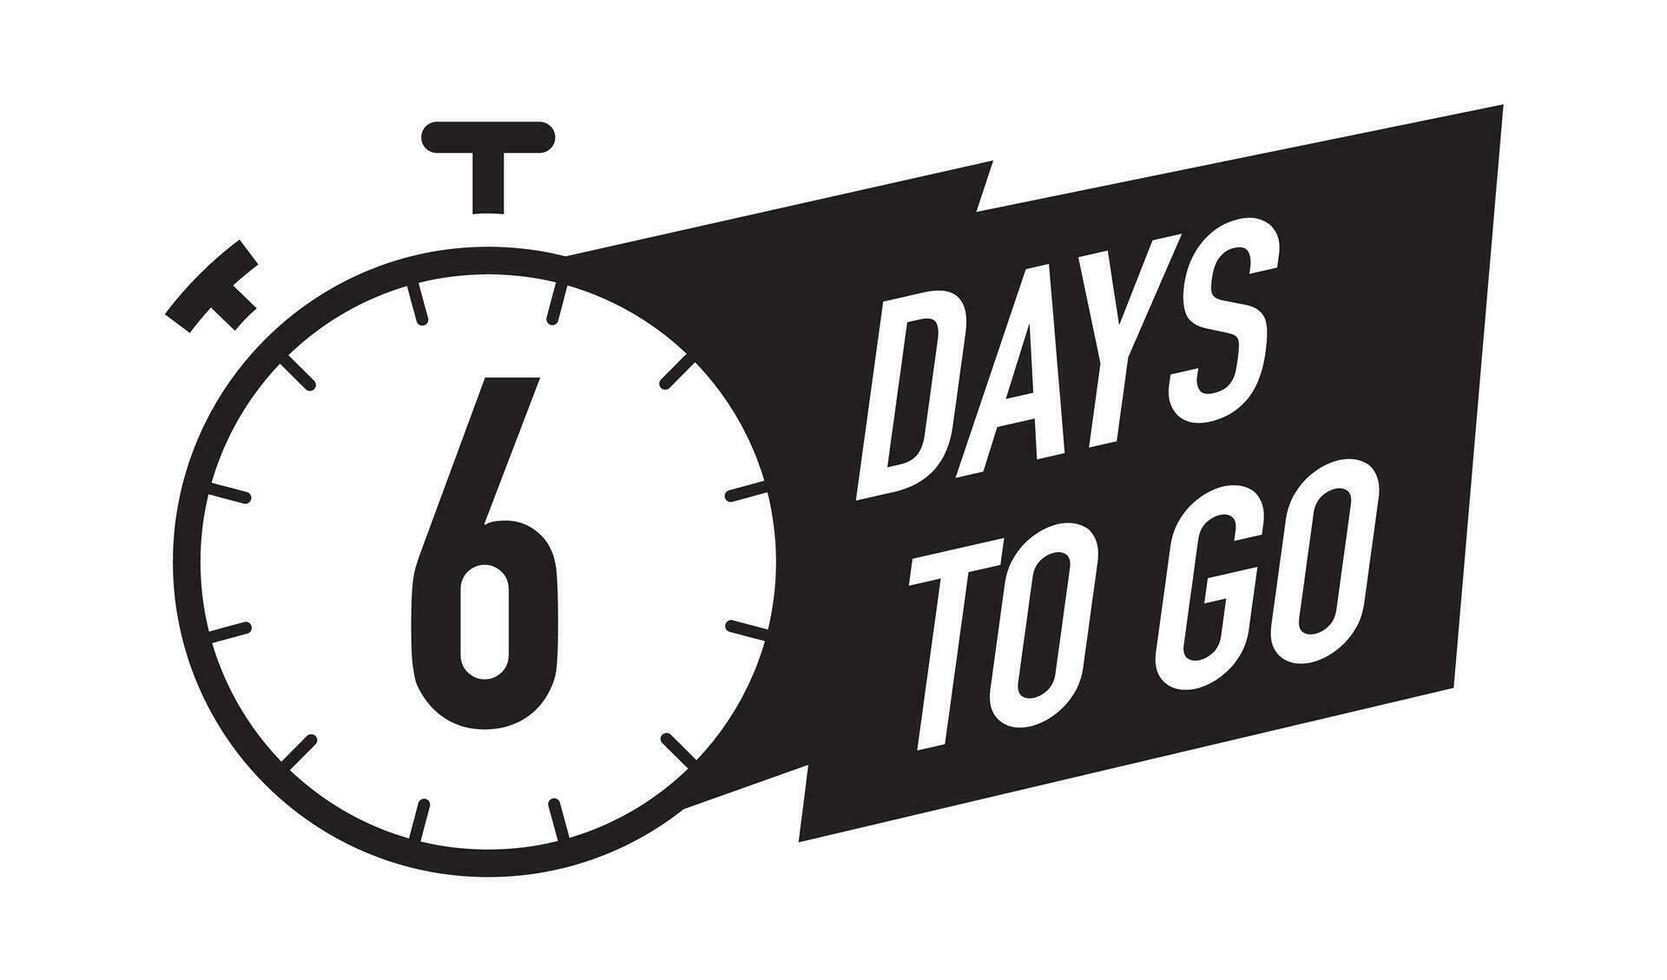 6 days to go timer symbol black color flat style vector